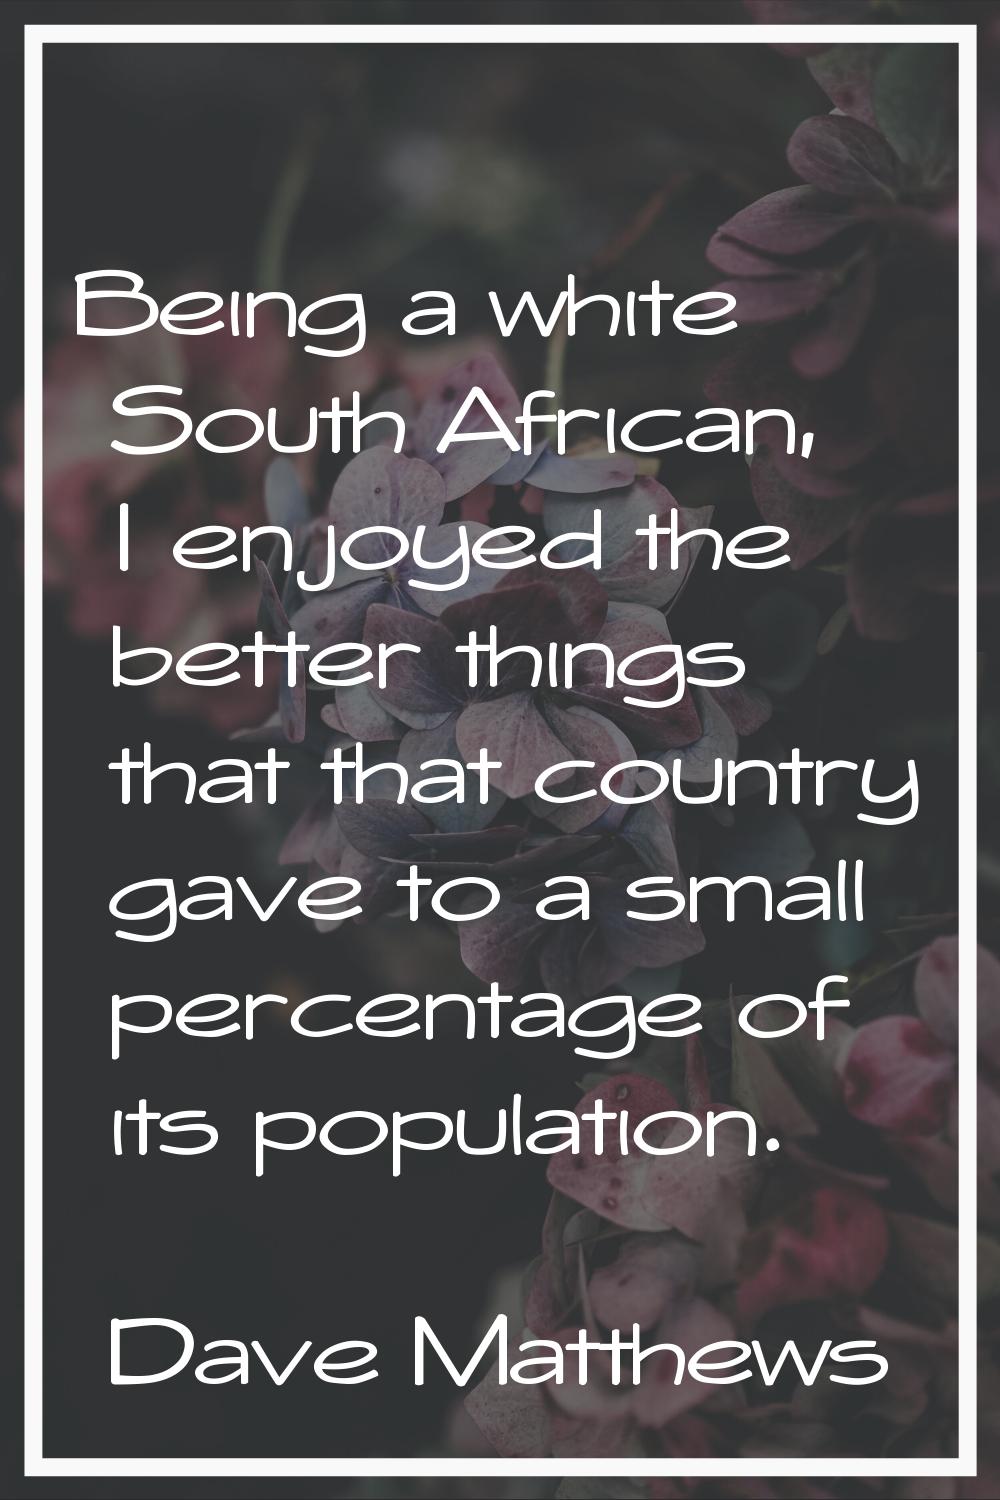 Being a white South African, I enjoyed the better things that that country gave to a small percenta